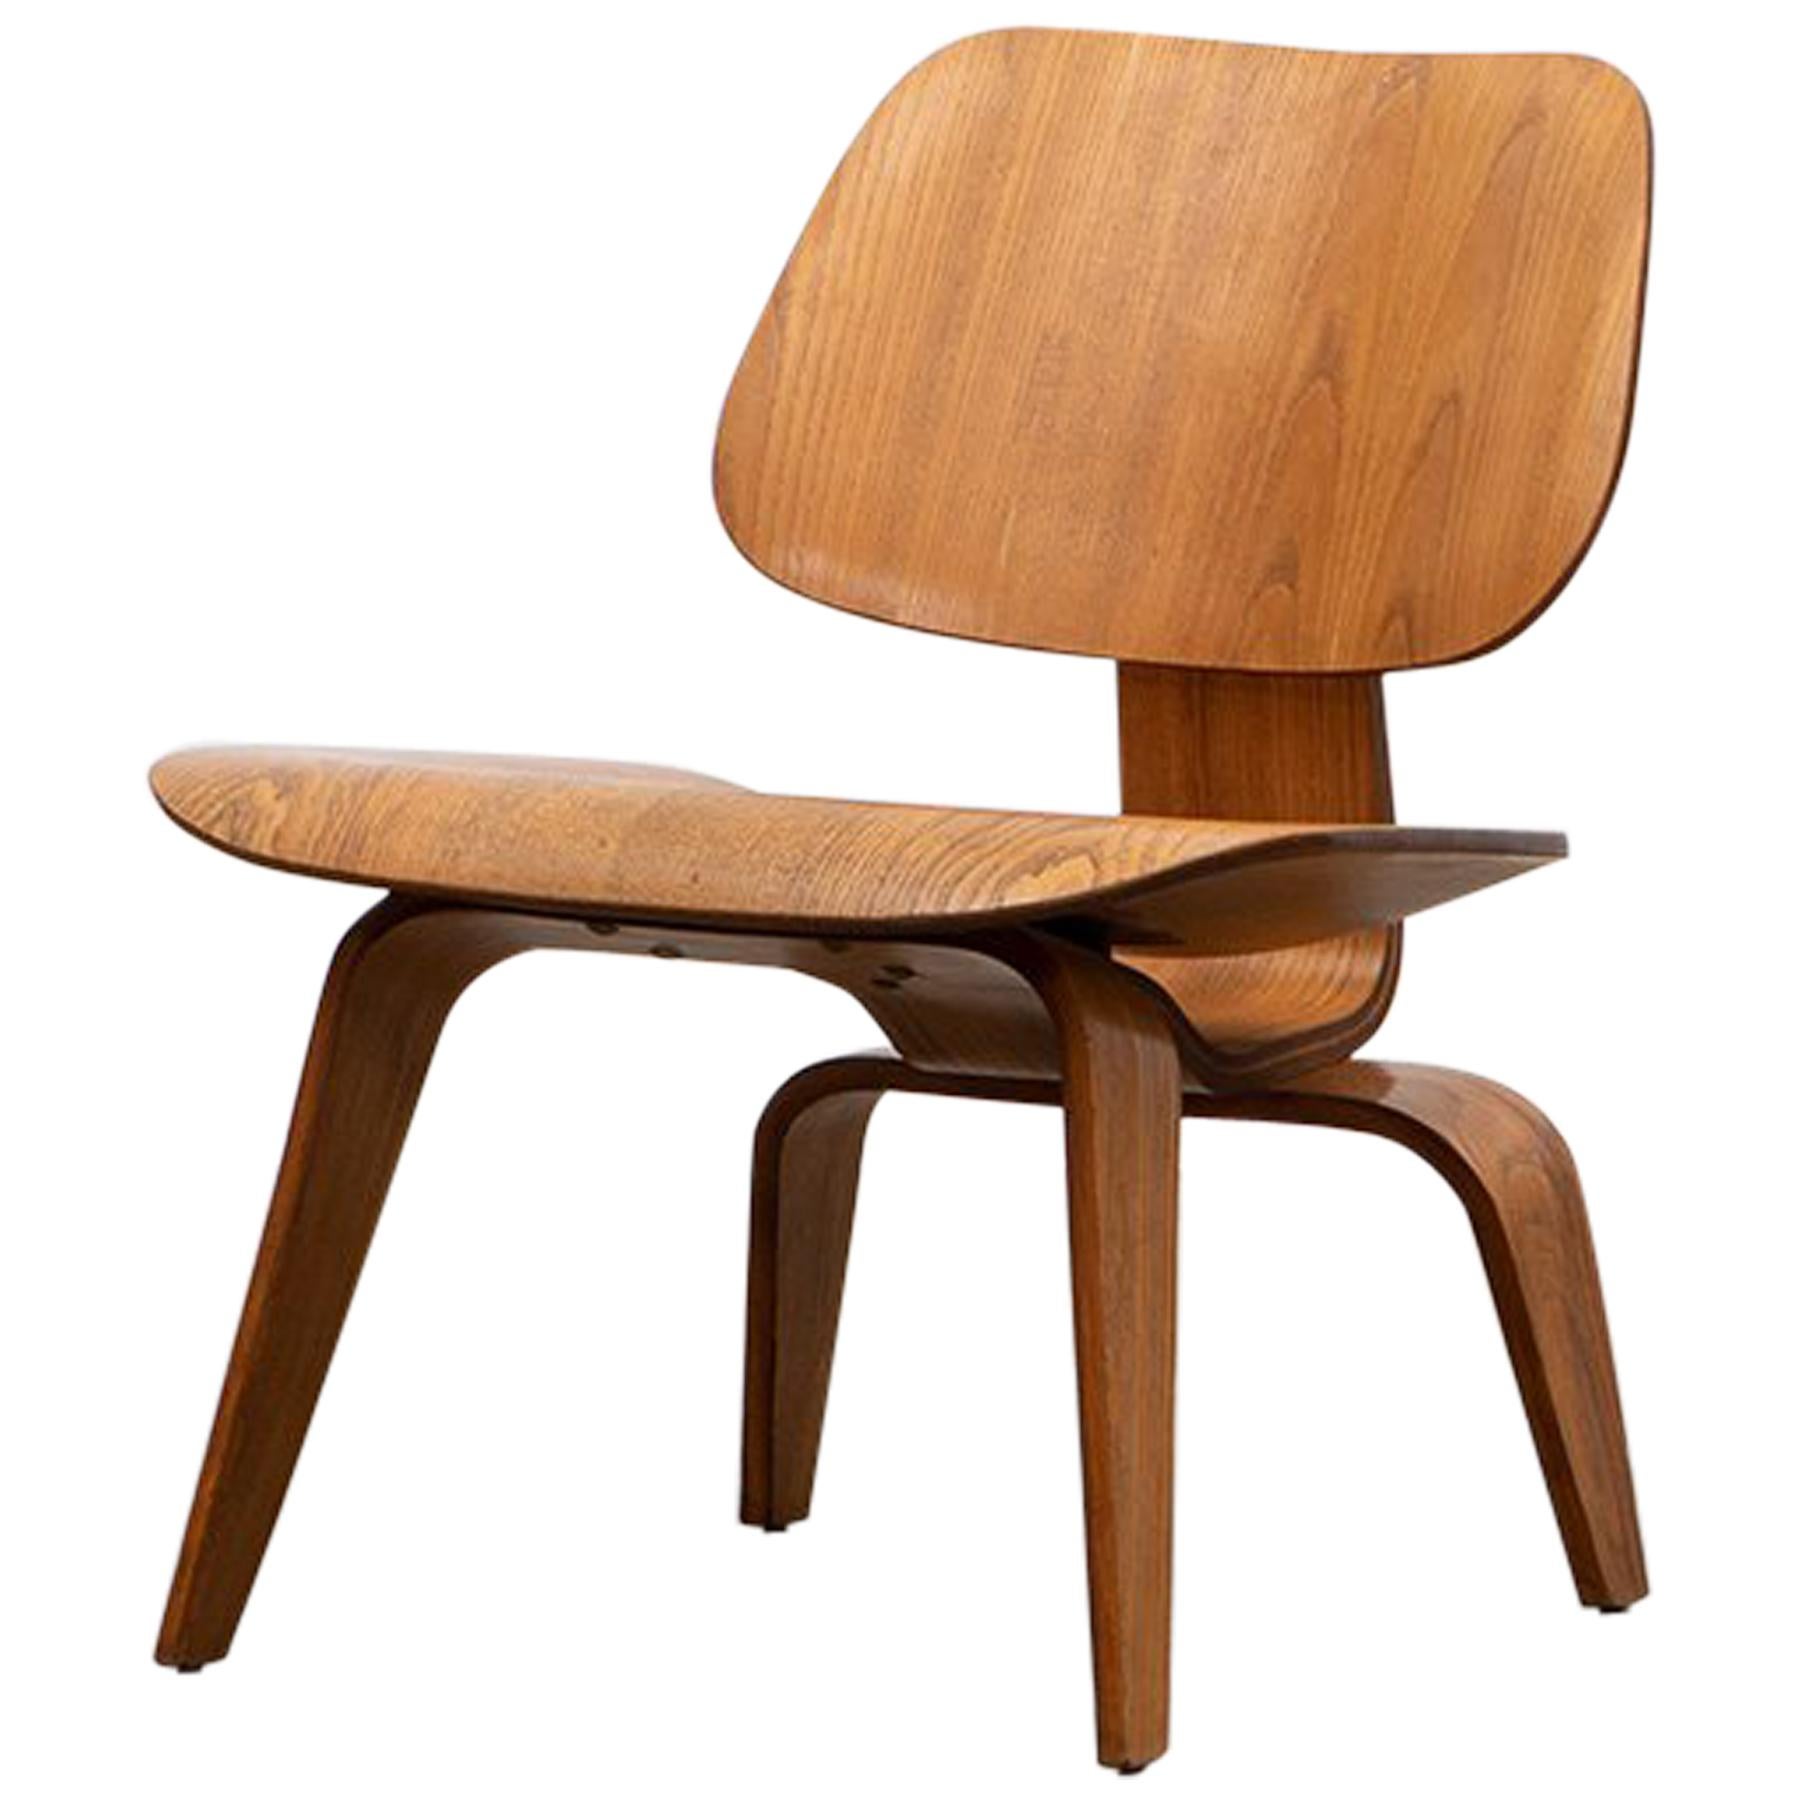 1940s Ash Plywood LCW Chair by Charles and Ray Eames "D"